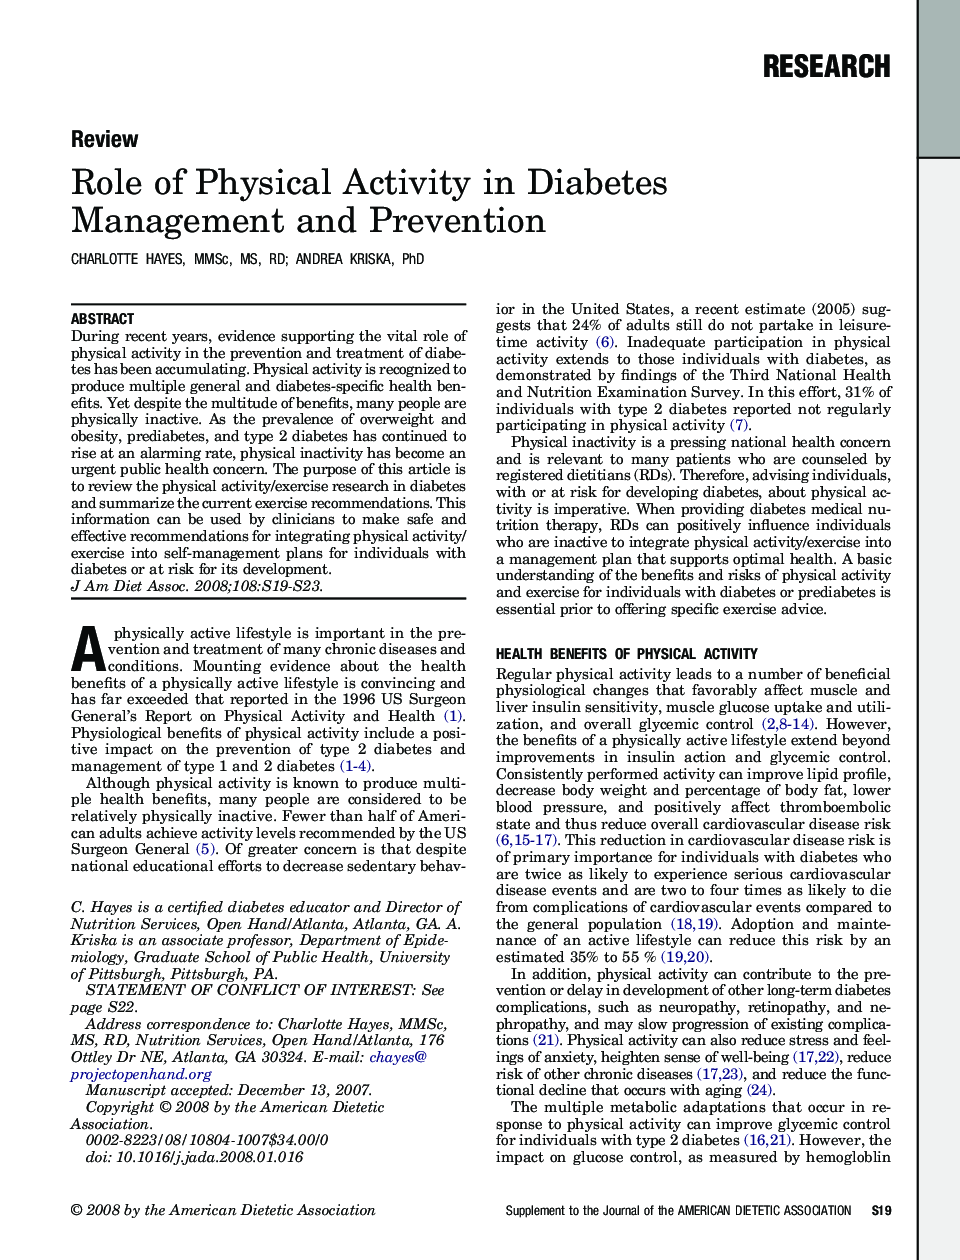 Role of Physical Activity in Diabetes Management and Prevention 